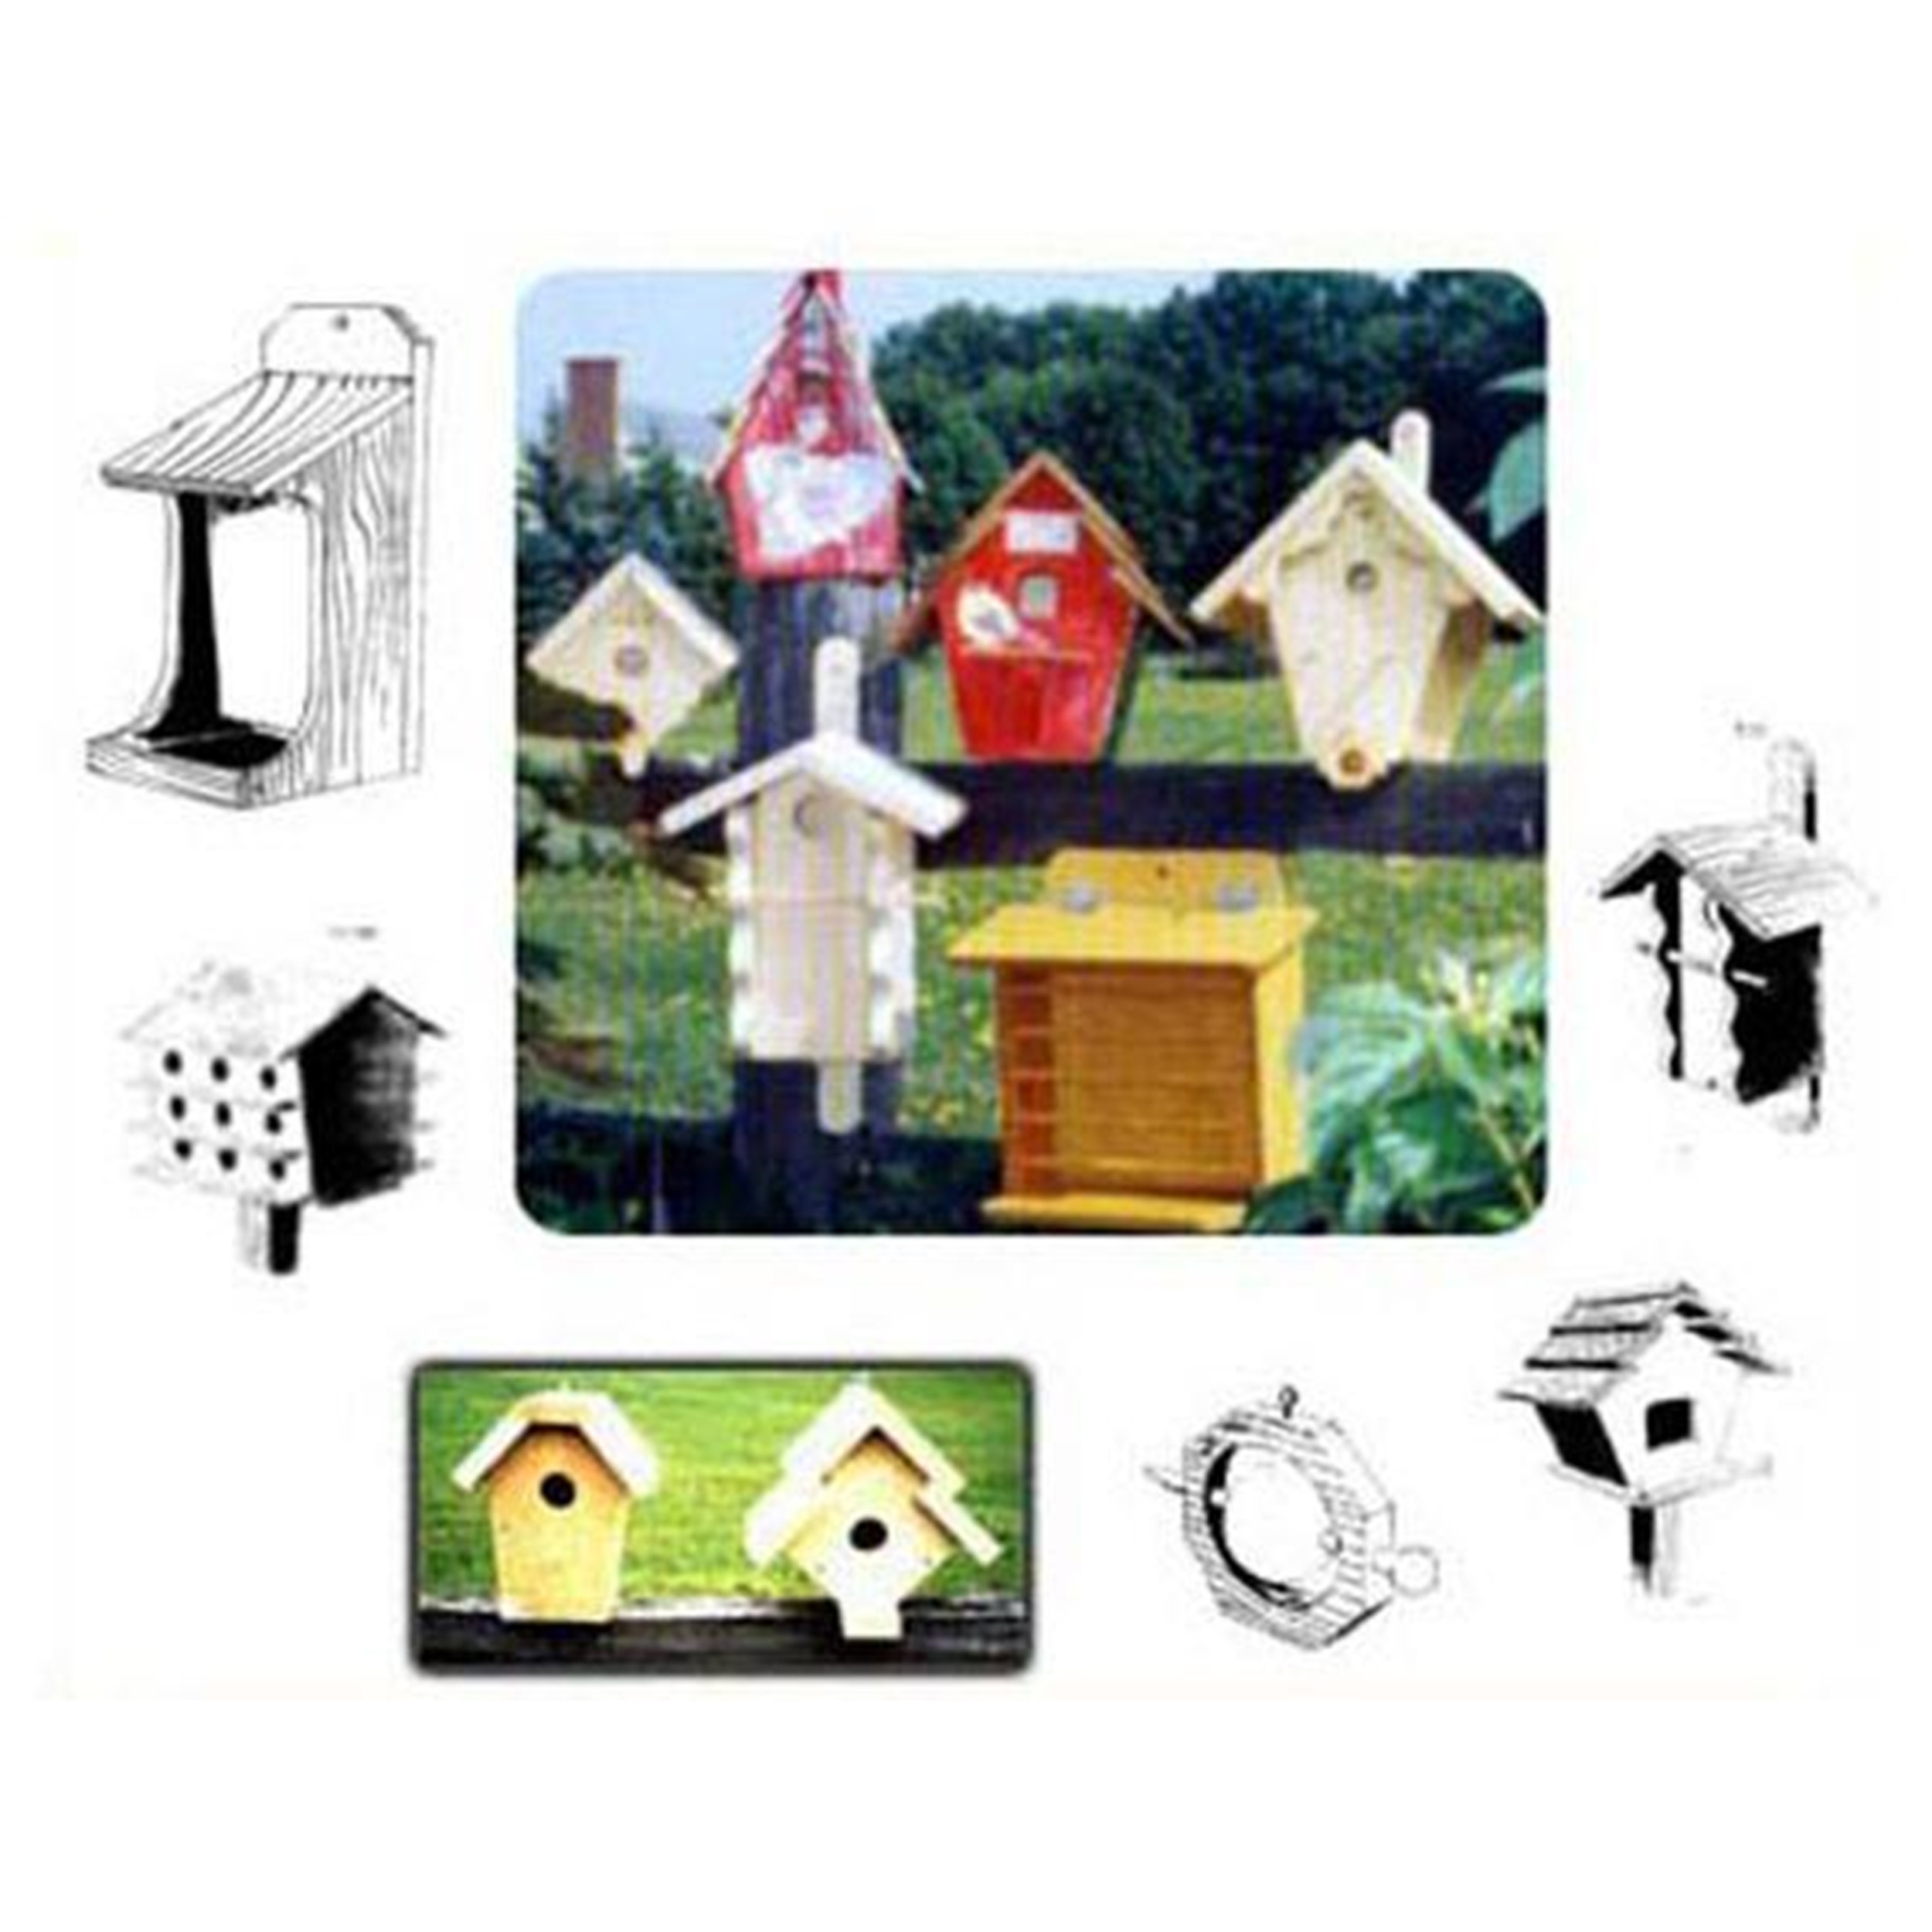 Woodworking Project Paper Plan To Build 27 Birdhouses And Feeders